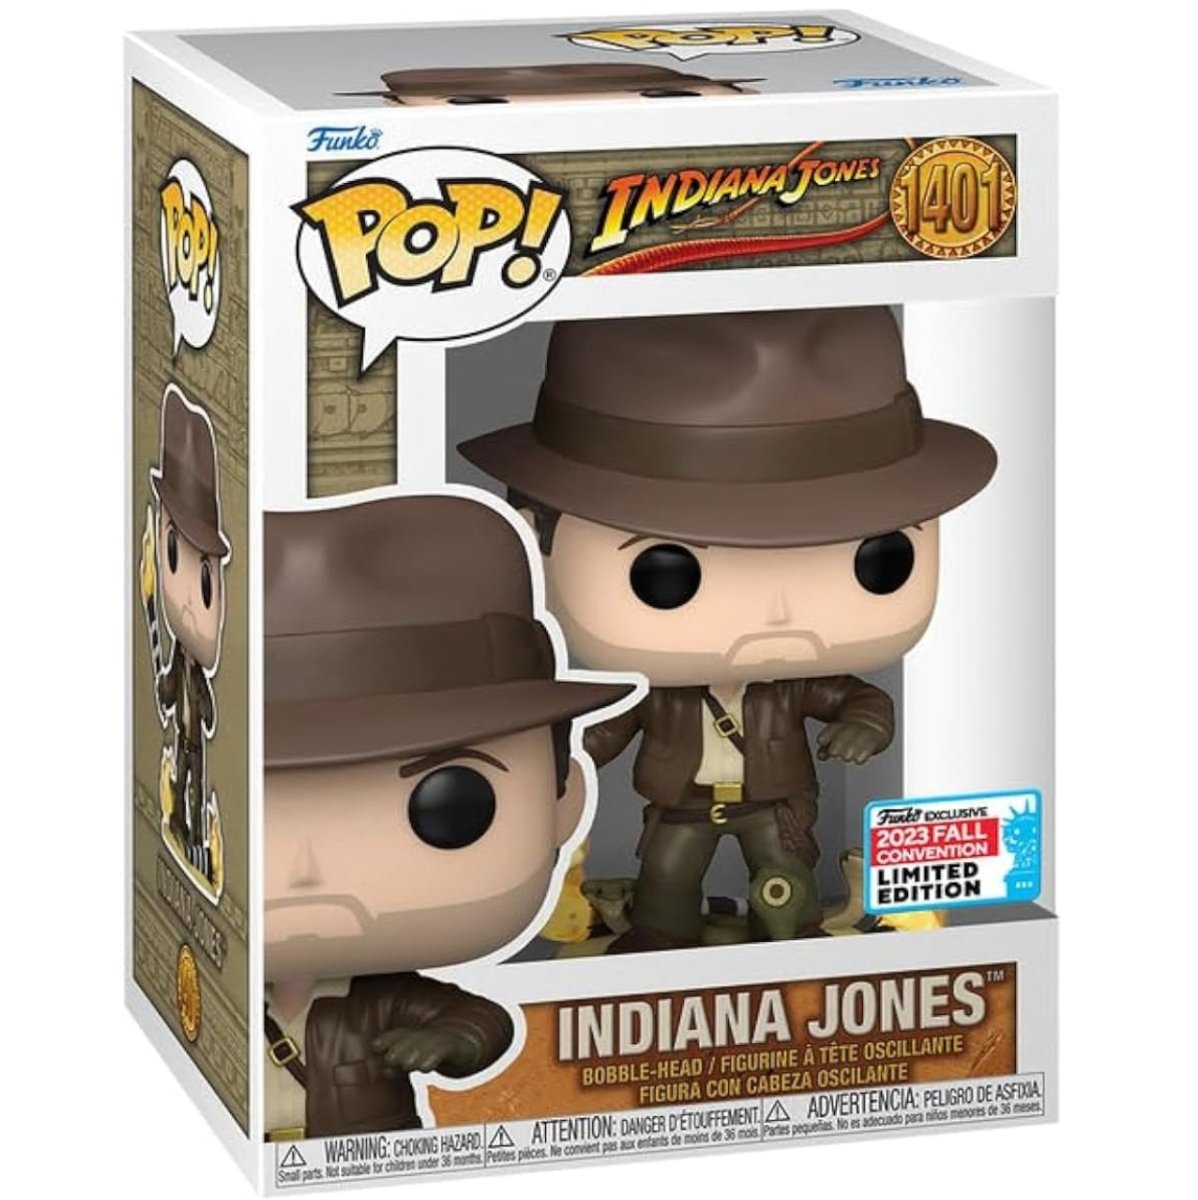 Indiana Jones - Indiana Jones [with Snakes] (2023 Fall Convention Limited Edition) #1401 - Funko Pop! Vinyl Movies - Persona Toys